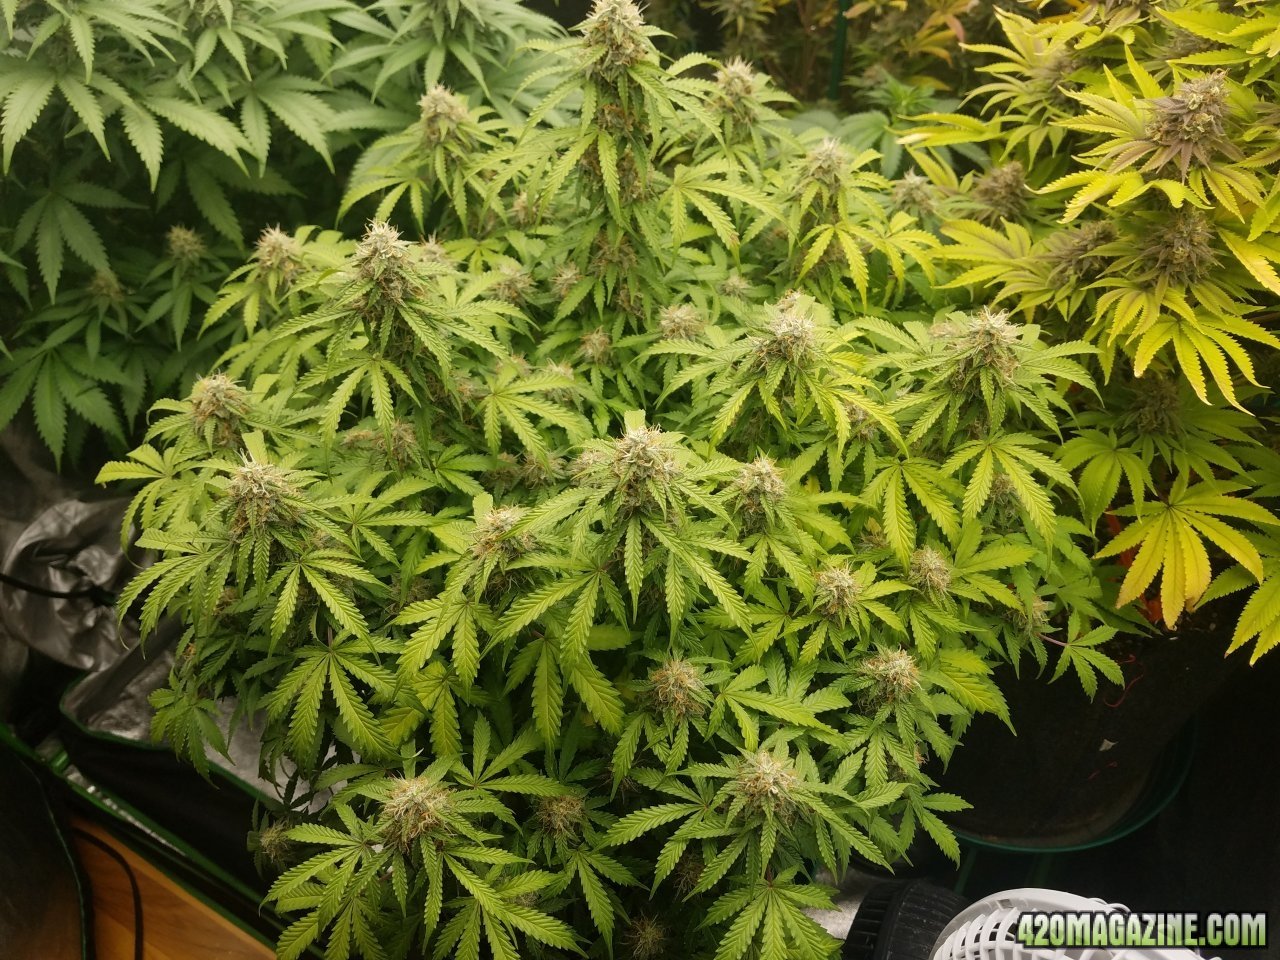 051318 Jack Herer Auto Day 87 Day 38 With Hairs 2.jpg